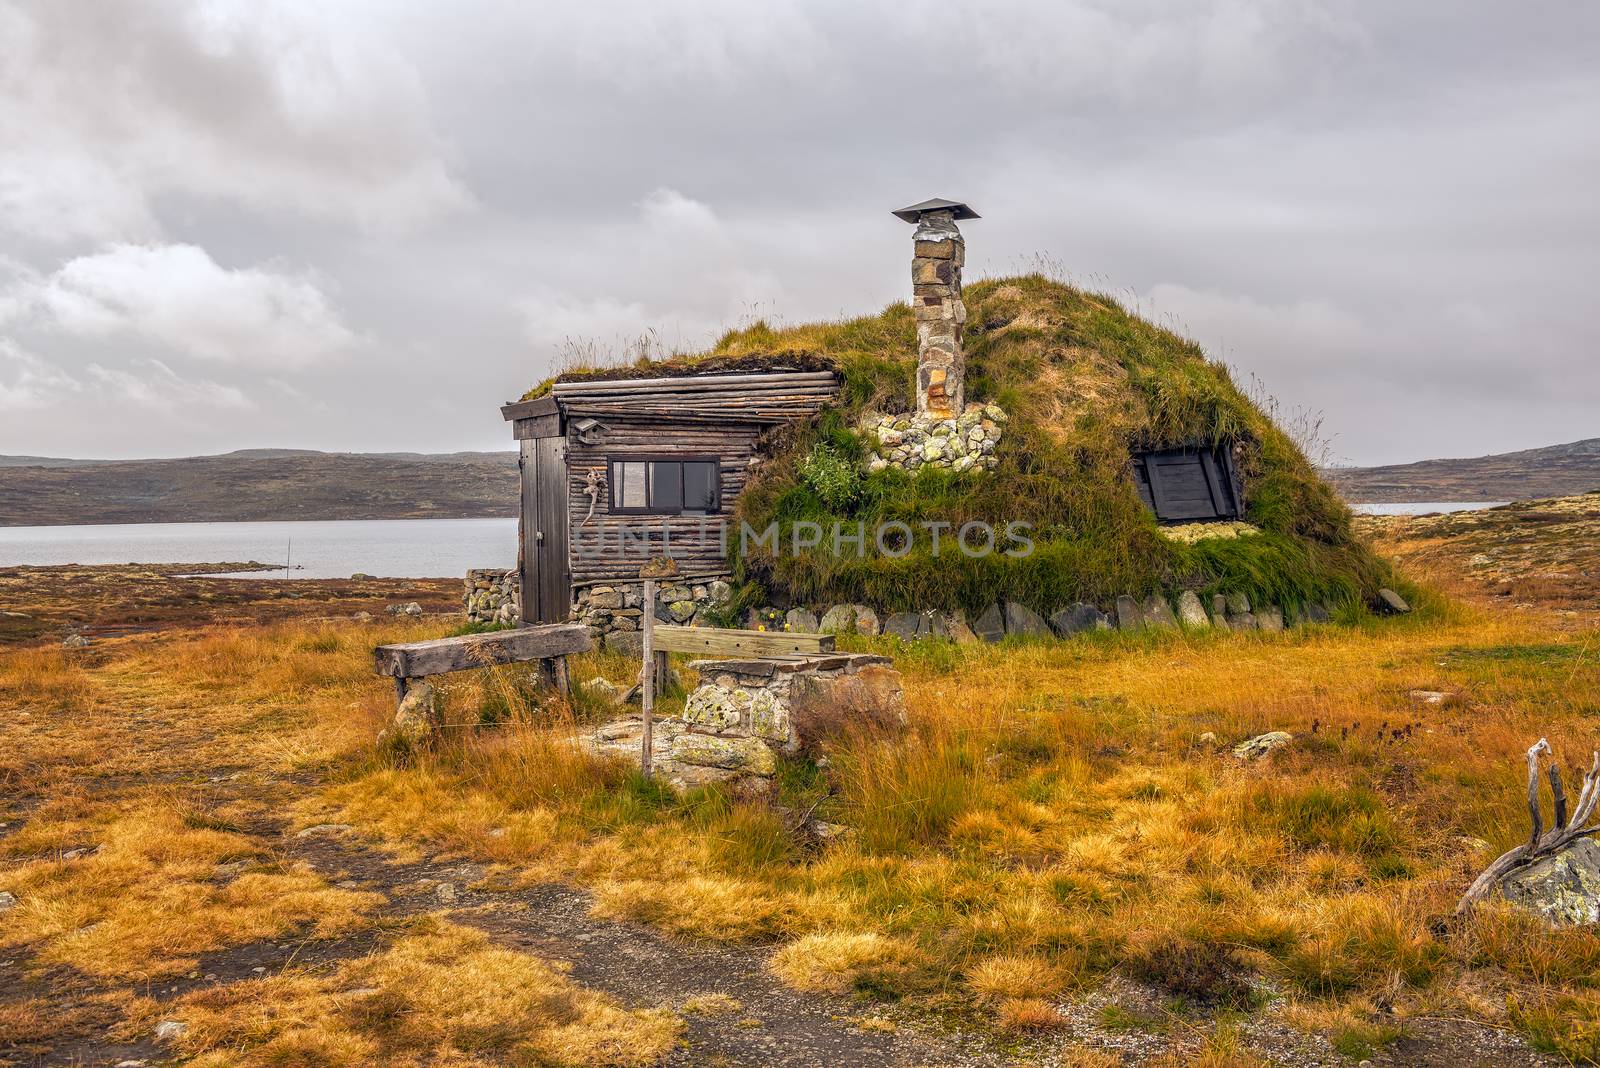 Cabin with turf roof near Hardangervidda National Park with a lake in the background, Hordaland county, Norway.